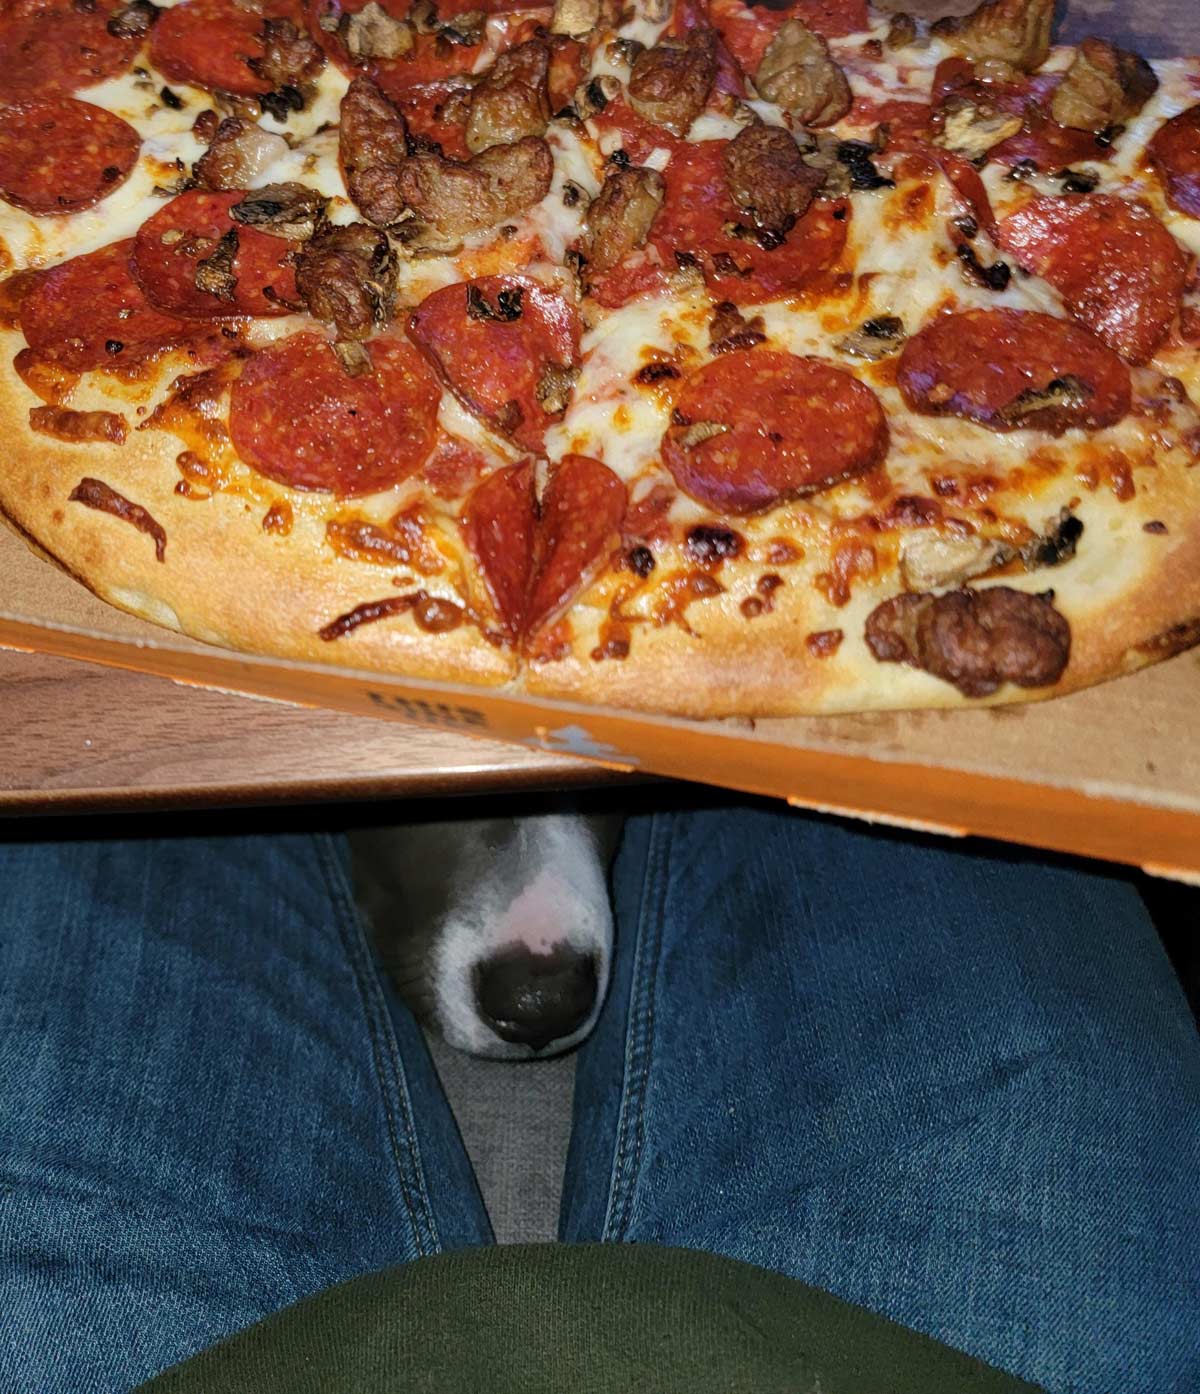 Waiting on that one piece of stray sausage to fall off a slice